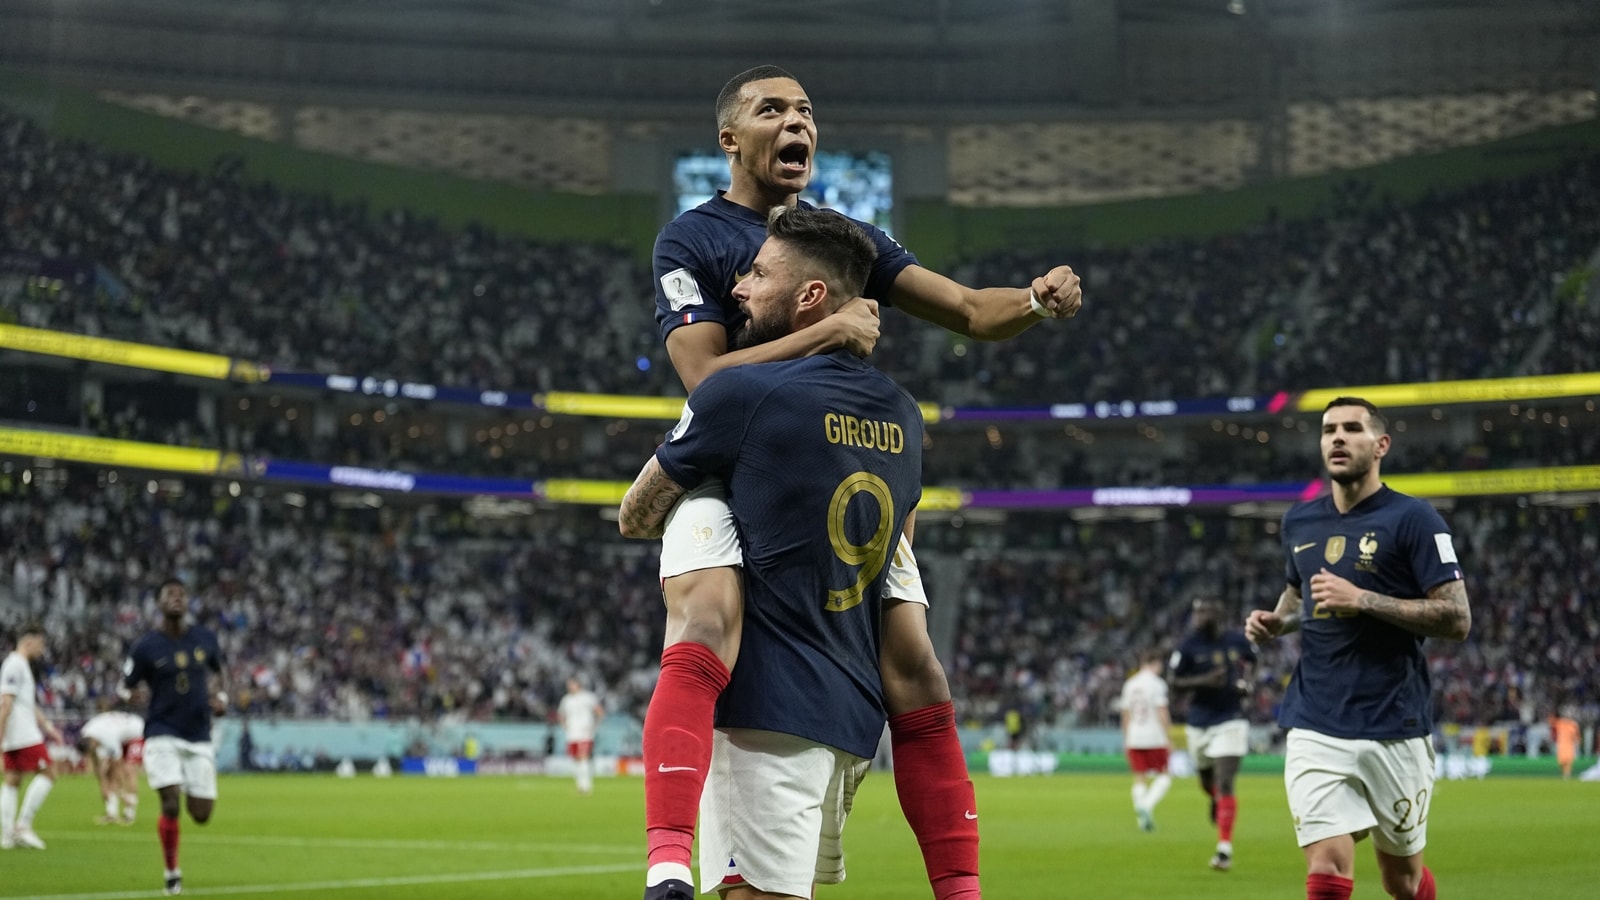 You go one-on-one with Mbappe, you’re basically hoping he has a bad game: Campbell